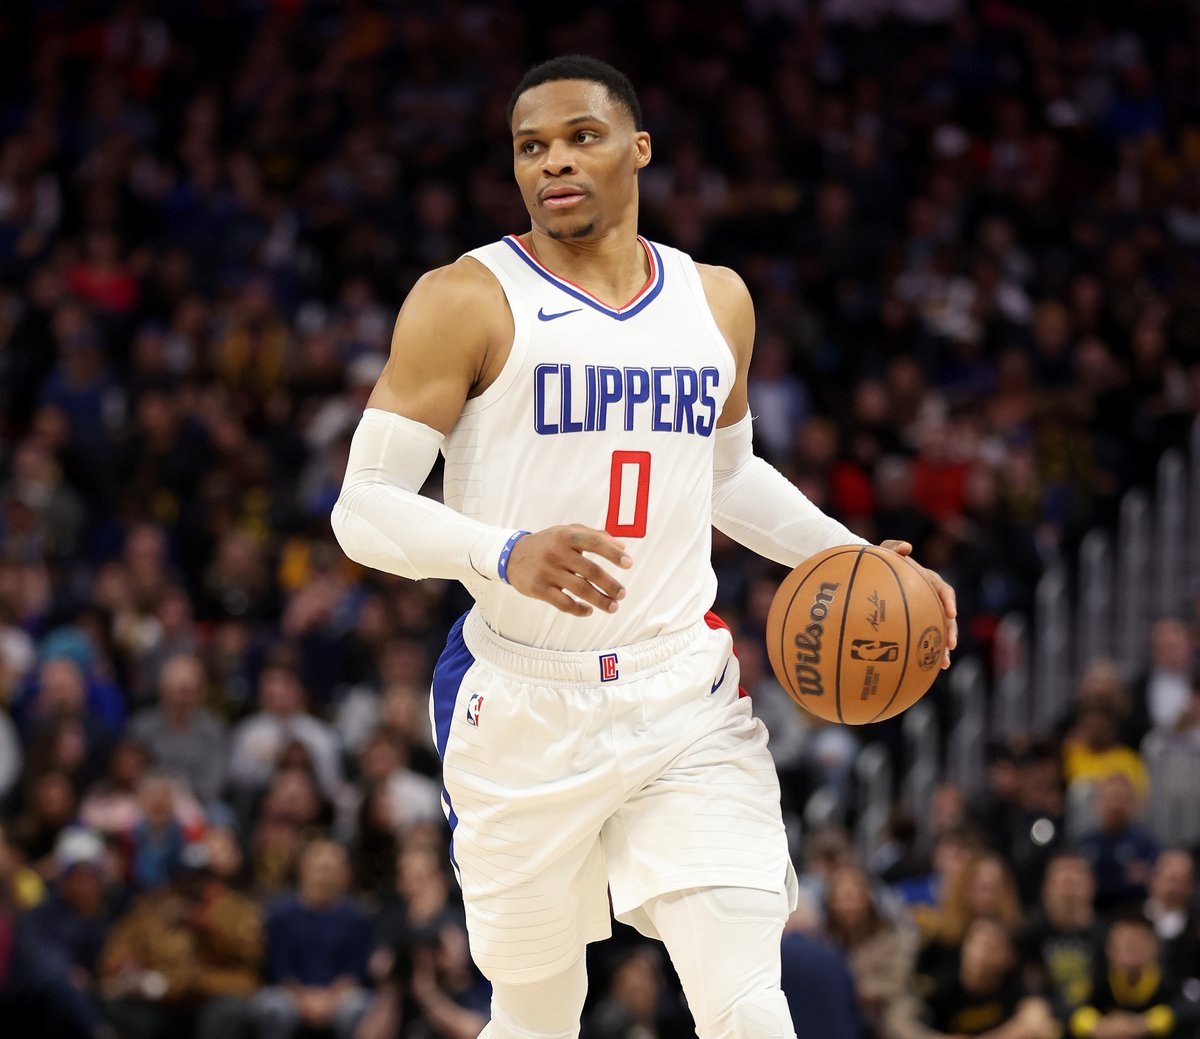 Russell Westbrook tonight: ▹ 1 point ▹ 0-for-7 ▹ 2 turnovers ▹ 1 EJECTION 😬 #ClipperNation | #NBAPlayoffs